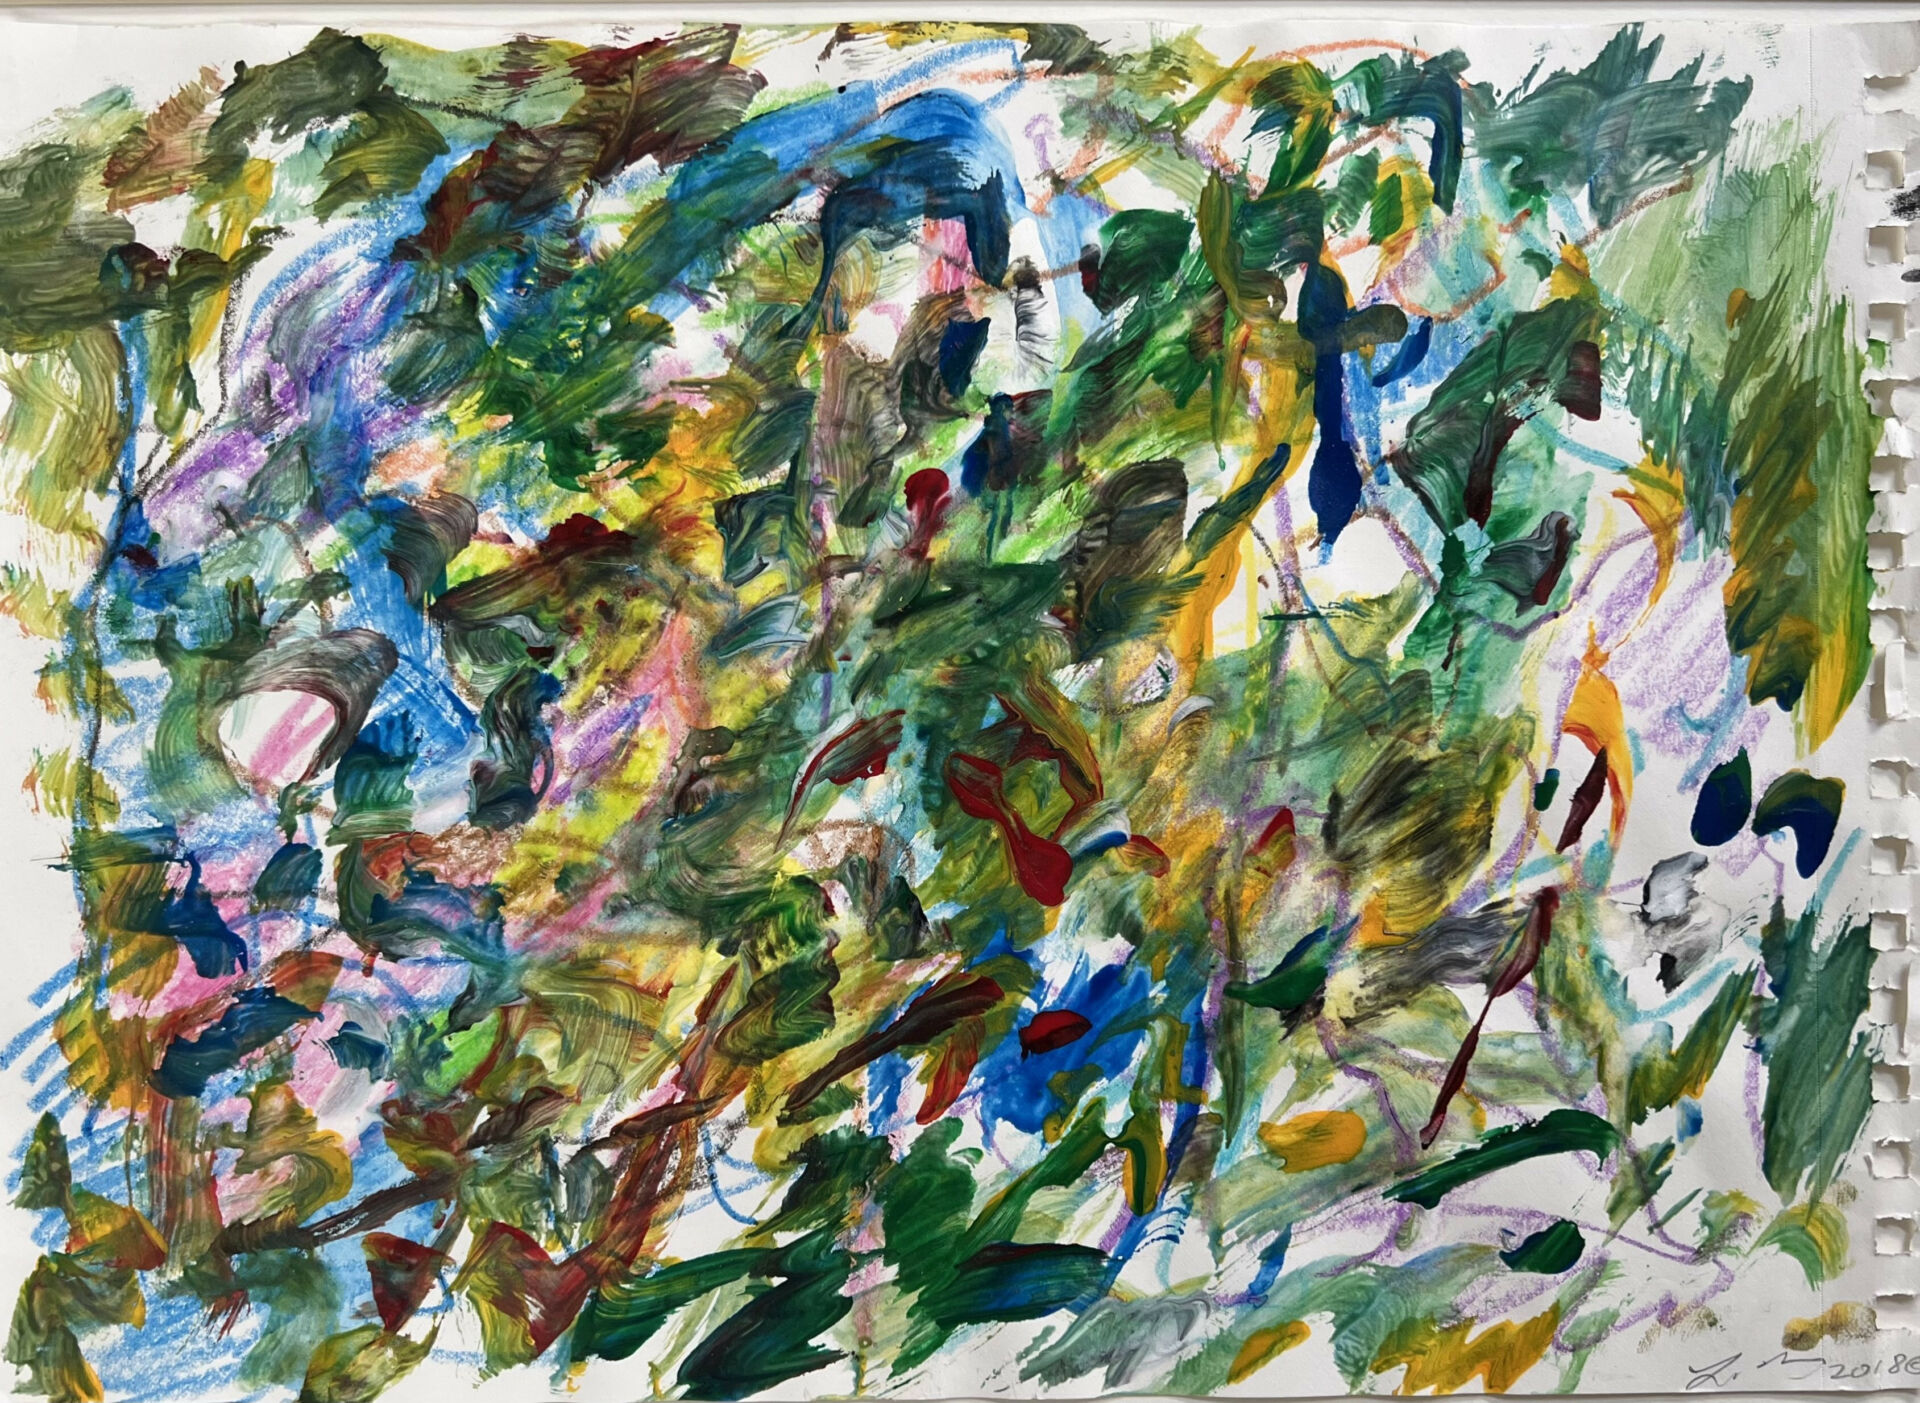 This Larry Poons original acrylic and watercolor on paper piece of art will be framed and then auctioned during the Barber Vintage Festival to benefit AHRMA. Image courtesy AHRMA.